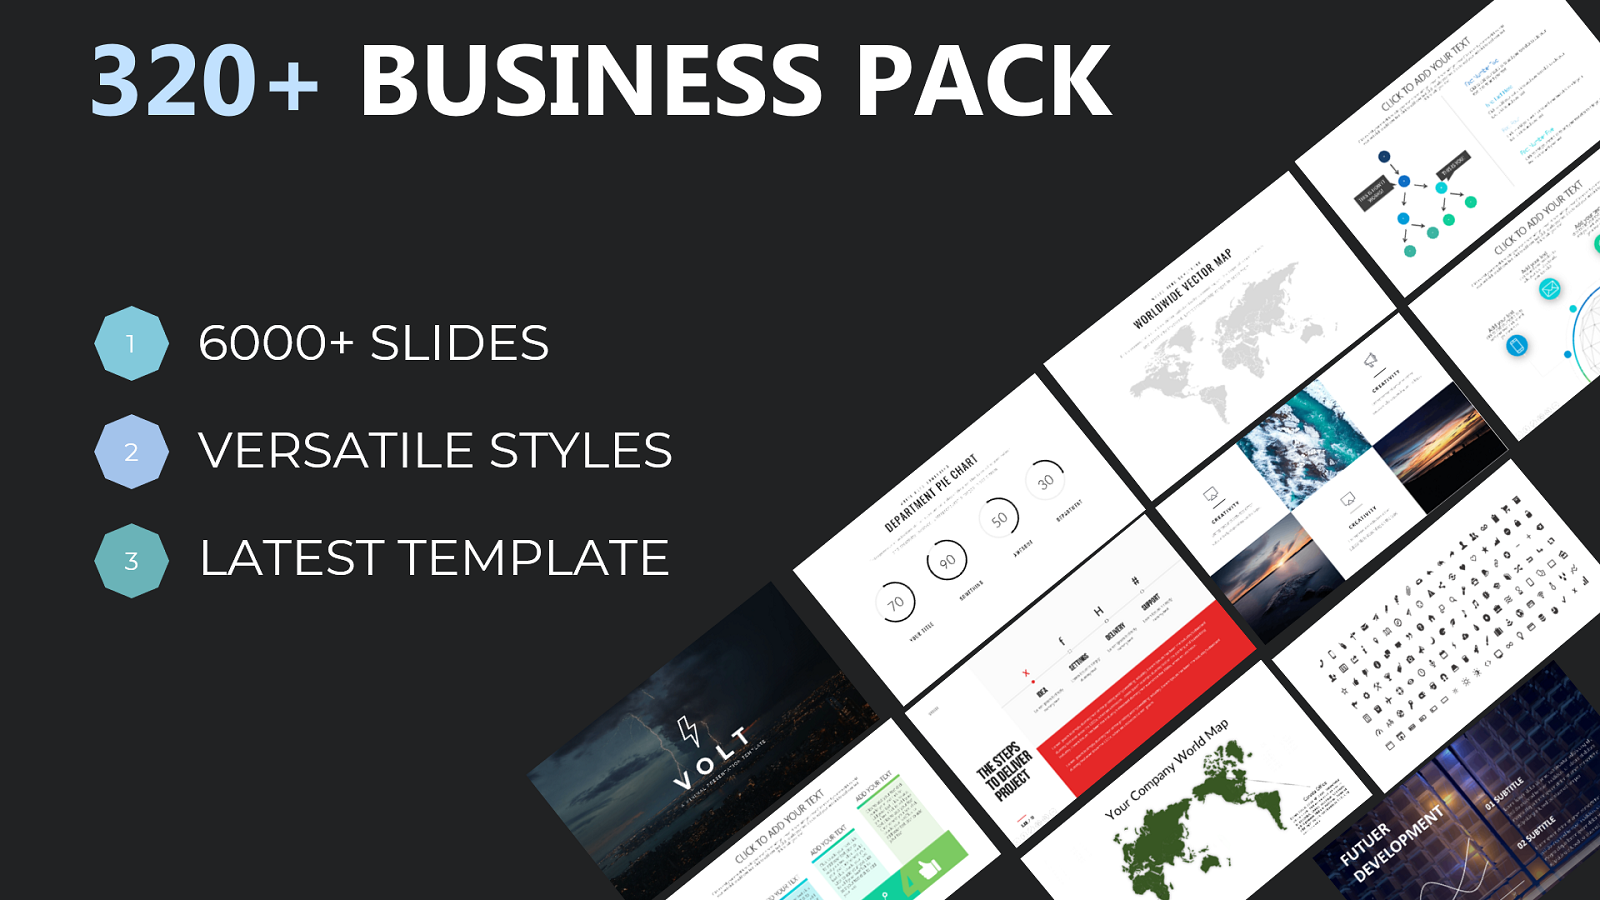 Upscale Business Pack PowerPoint templates(Clean and Creative included)